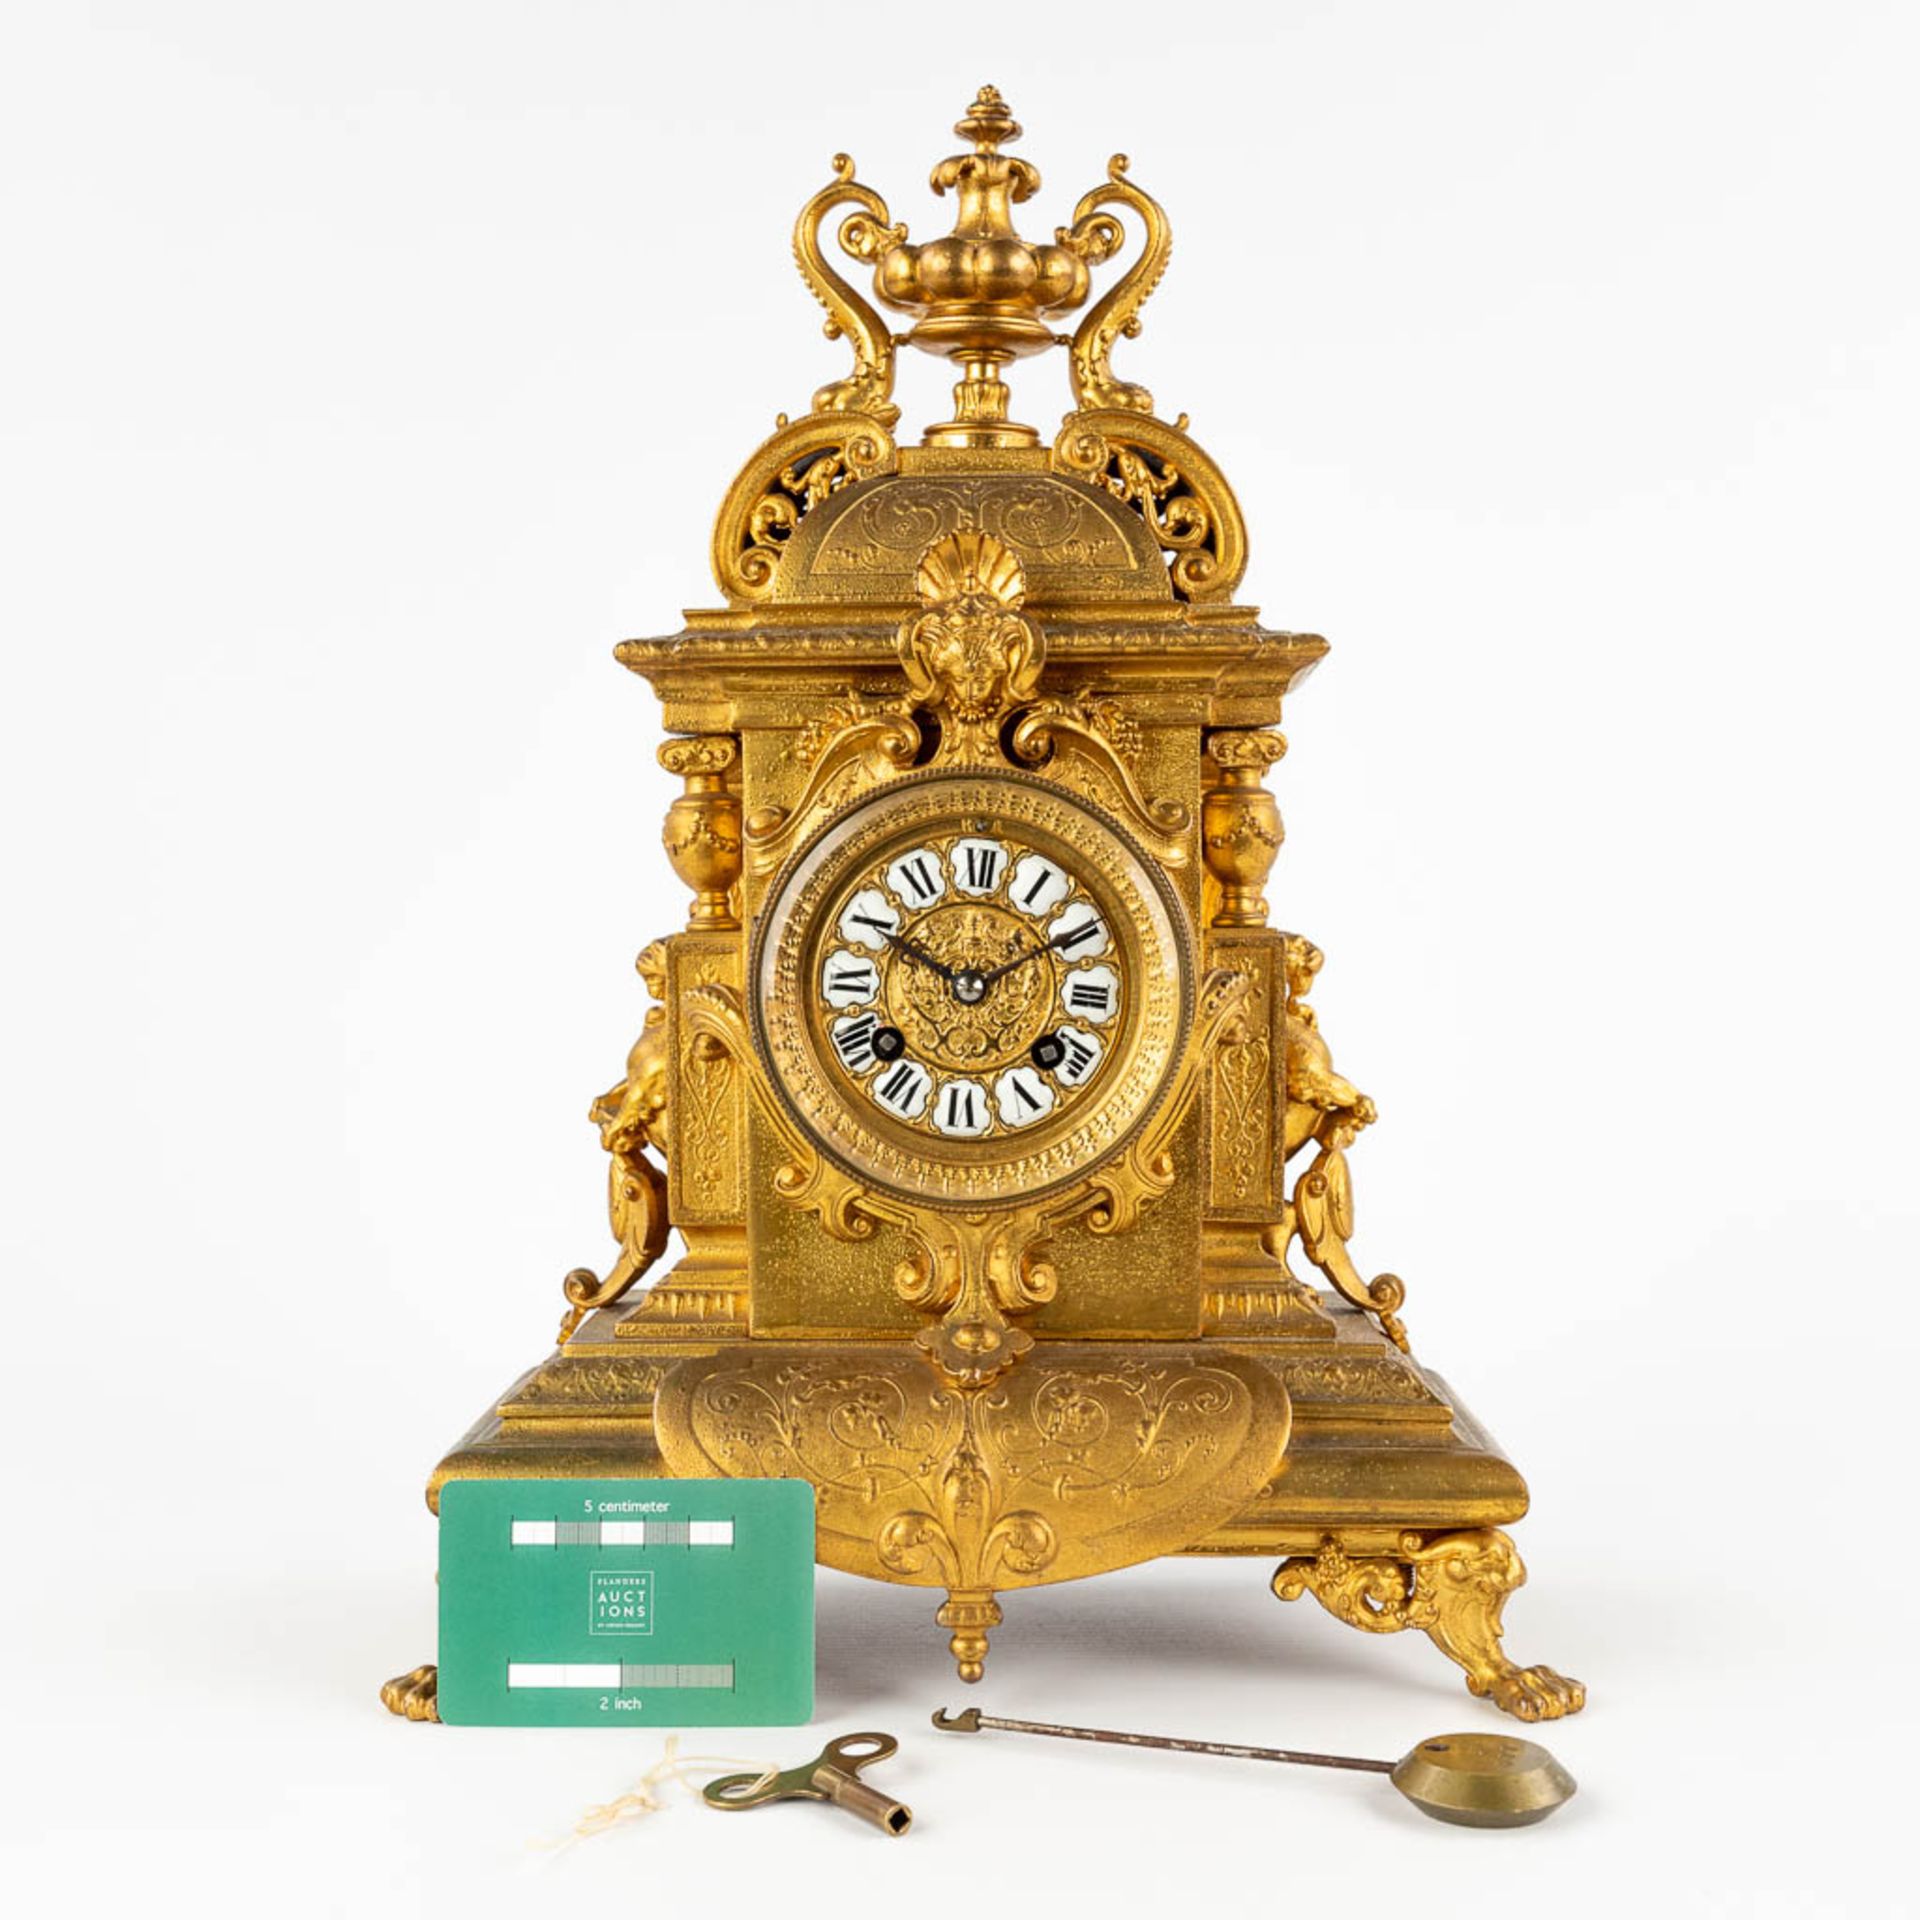 A mantle clock, Neoclassical style, gilt spelter. 19th C. (D:13 x W:27 x H:40 cm) - Image 2 of 13